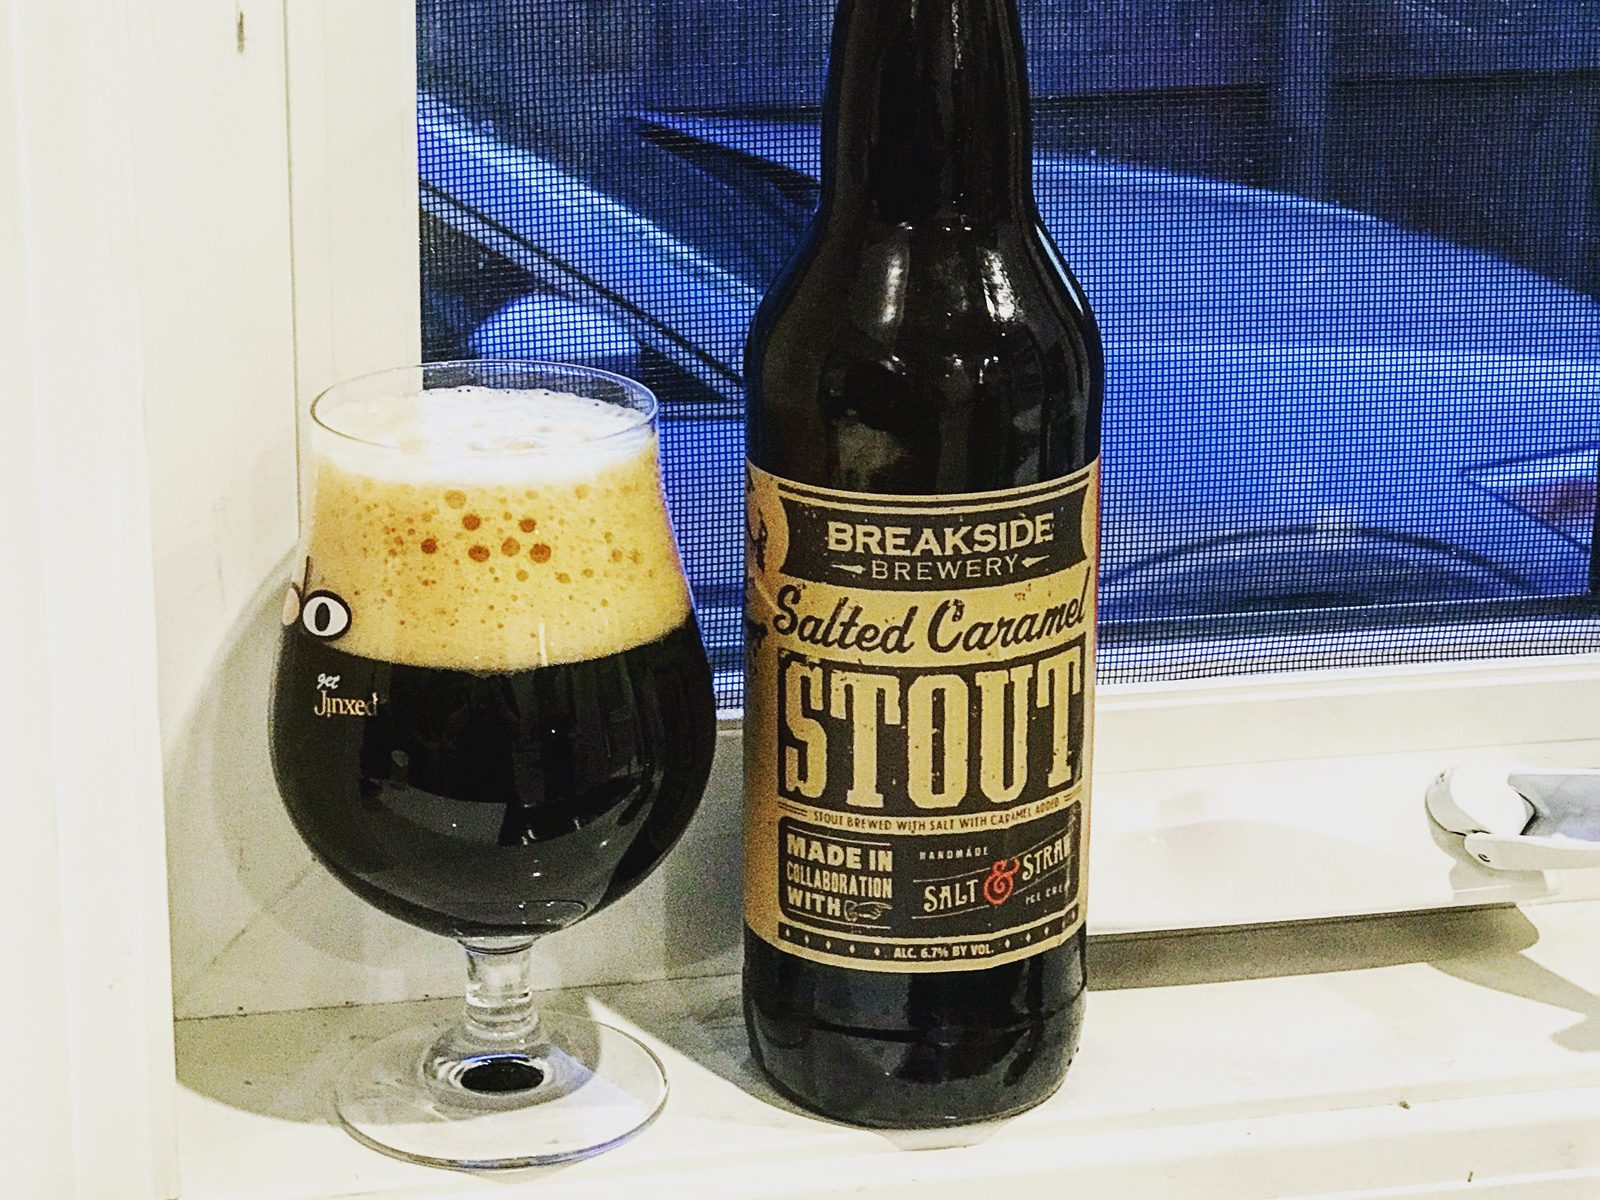 Breakside Brewery: Salted Caramel Stout